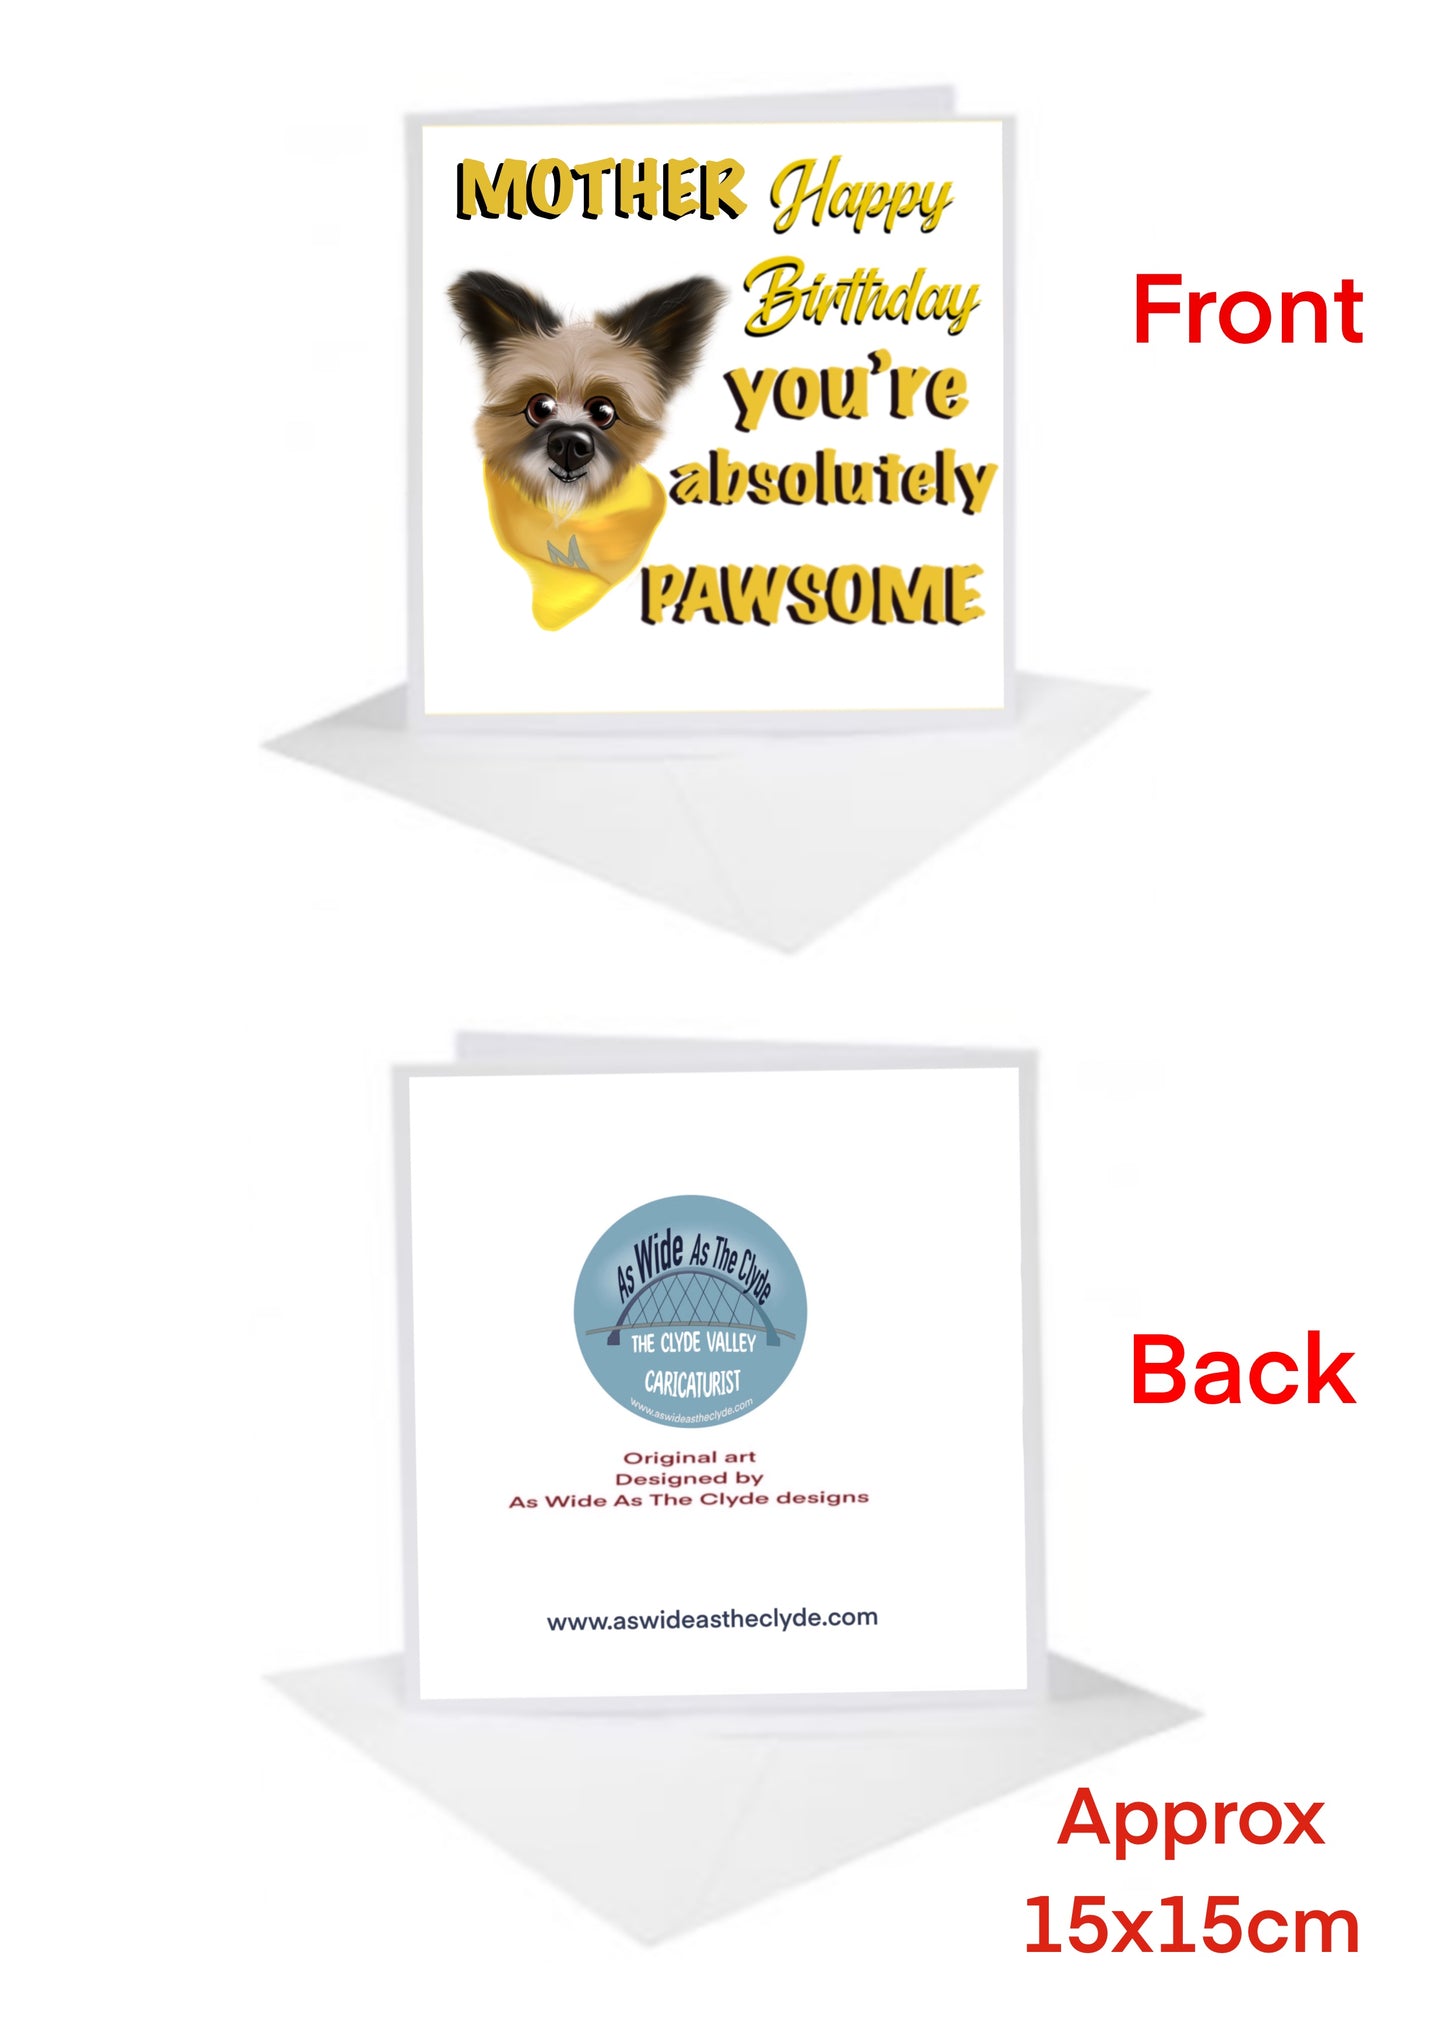 Mum Mother Cards-Cards Birthday cards form your Dogs-Dogs Pets pawesome #awatc